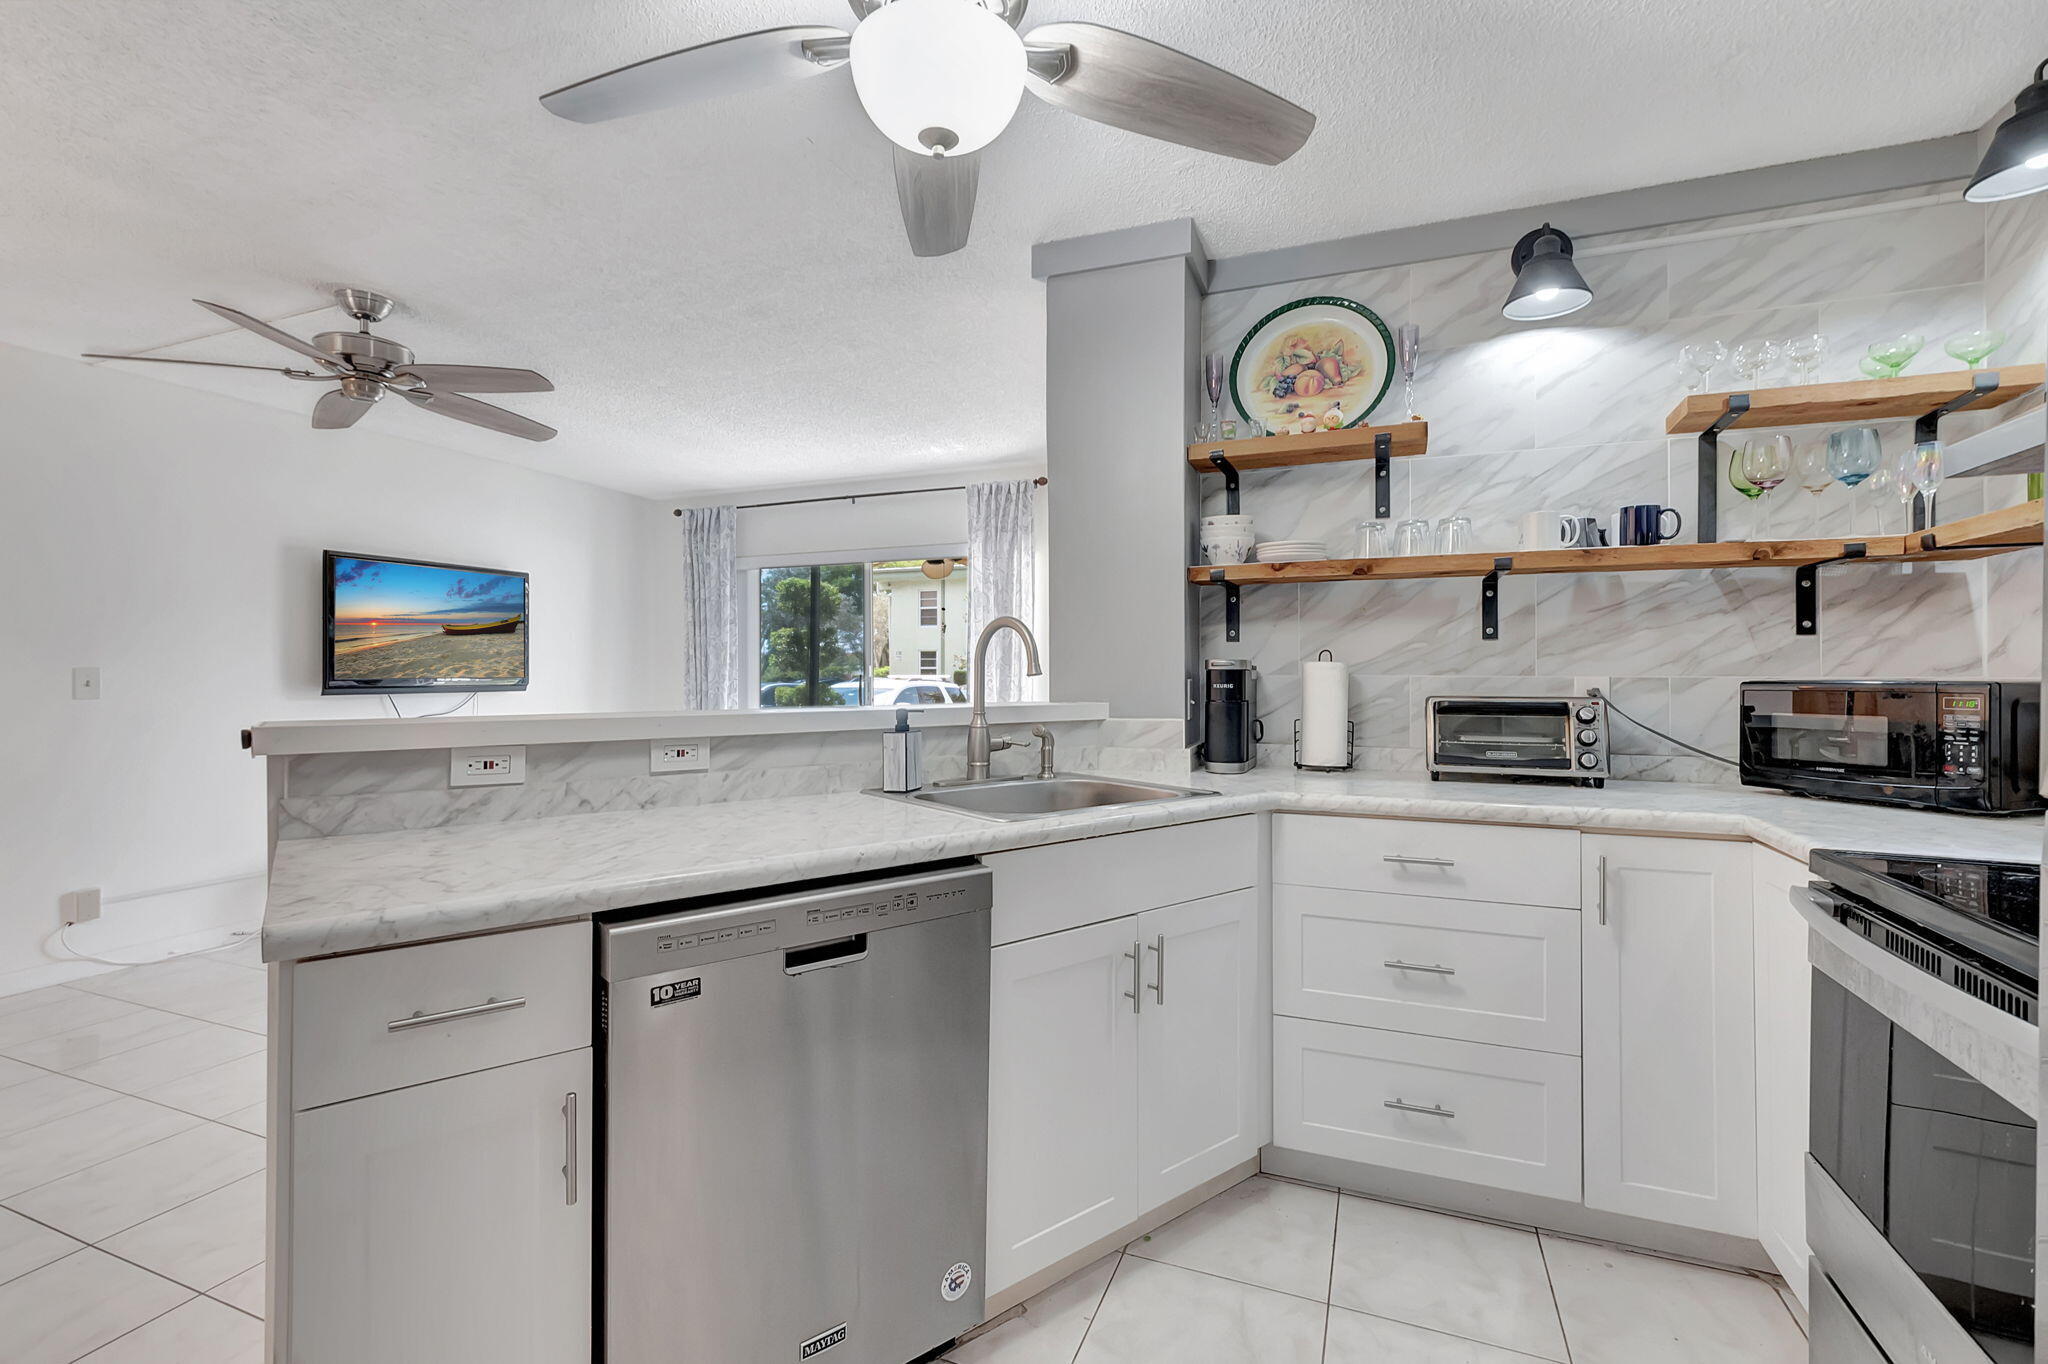 a kitchen with cabinets stainless steel appliances and a clock